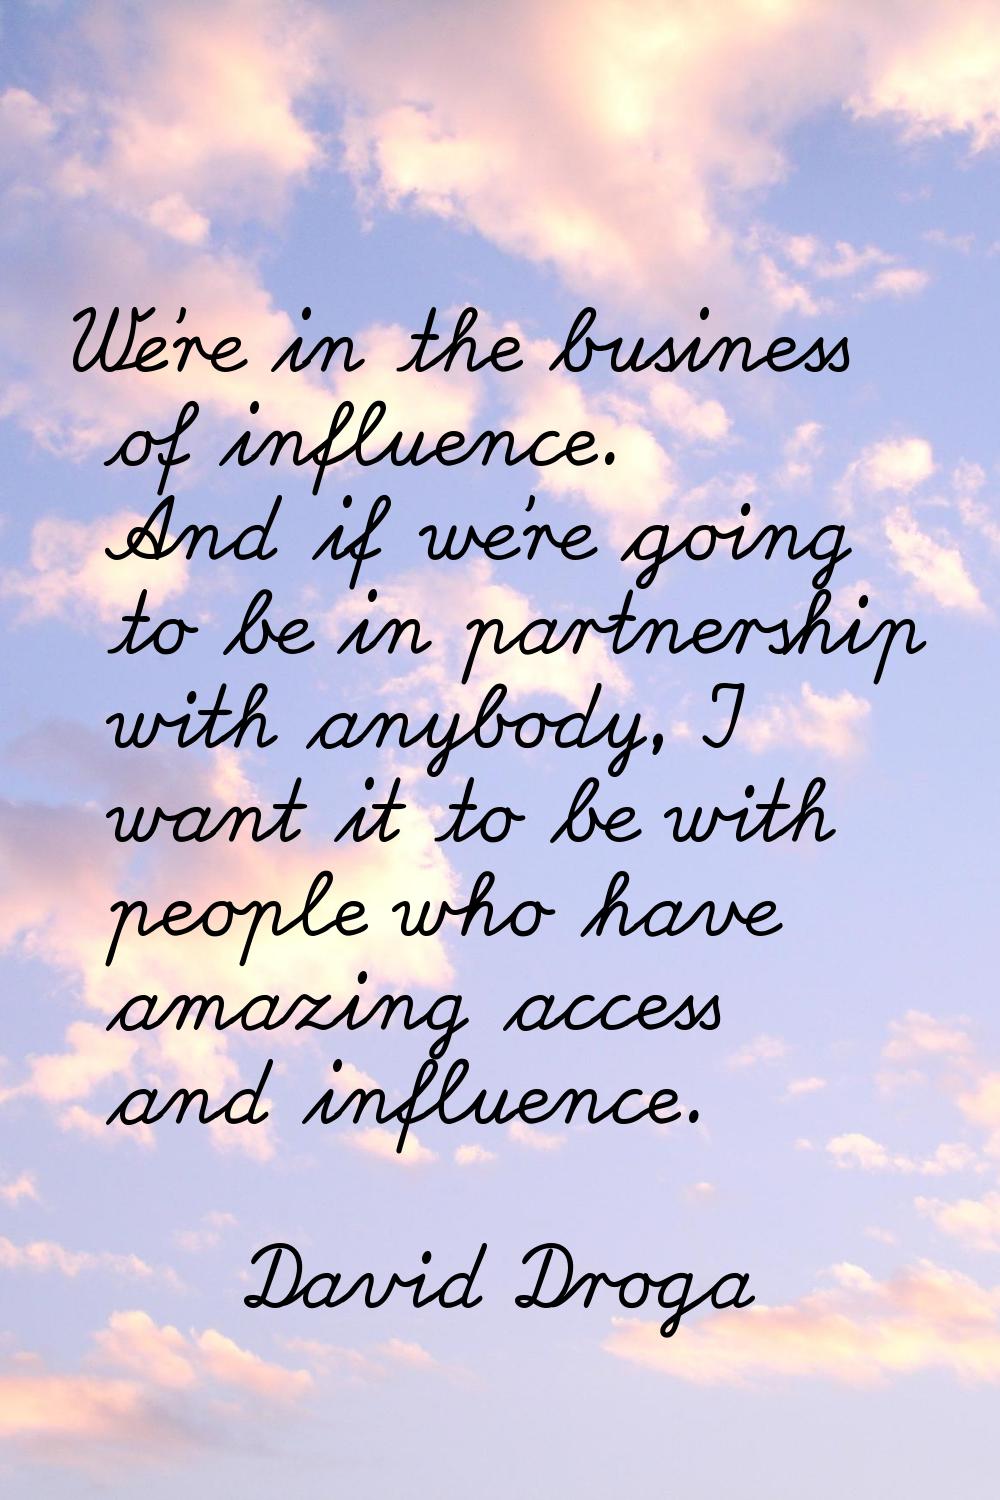 We're in the business of influence. And if we're going to be in partnership with anybody, I want it